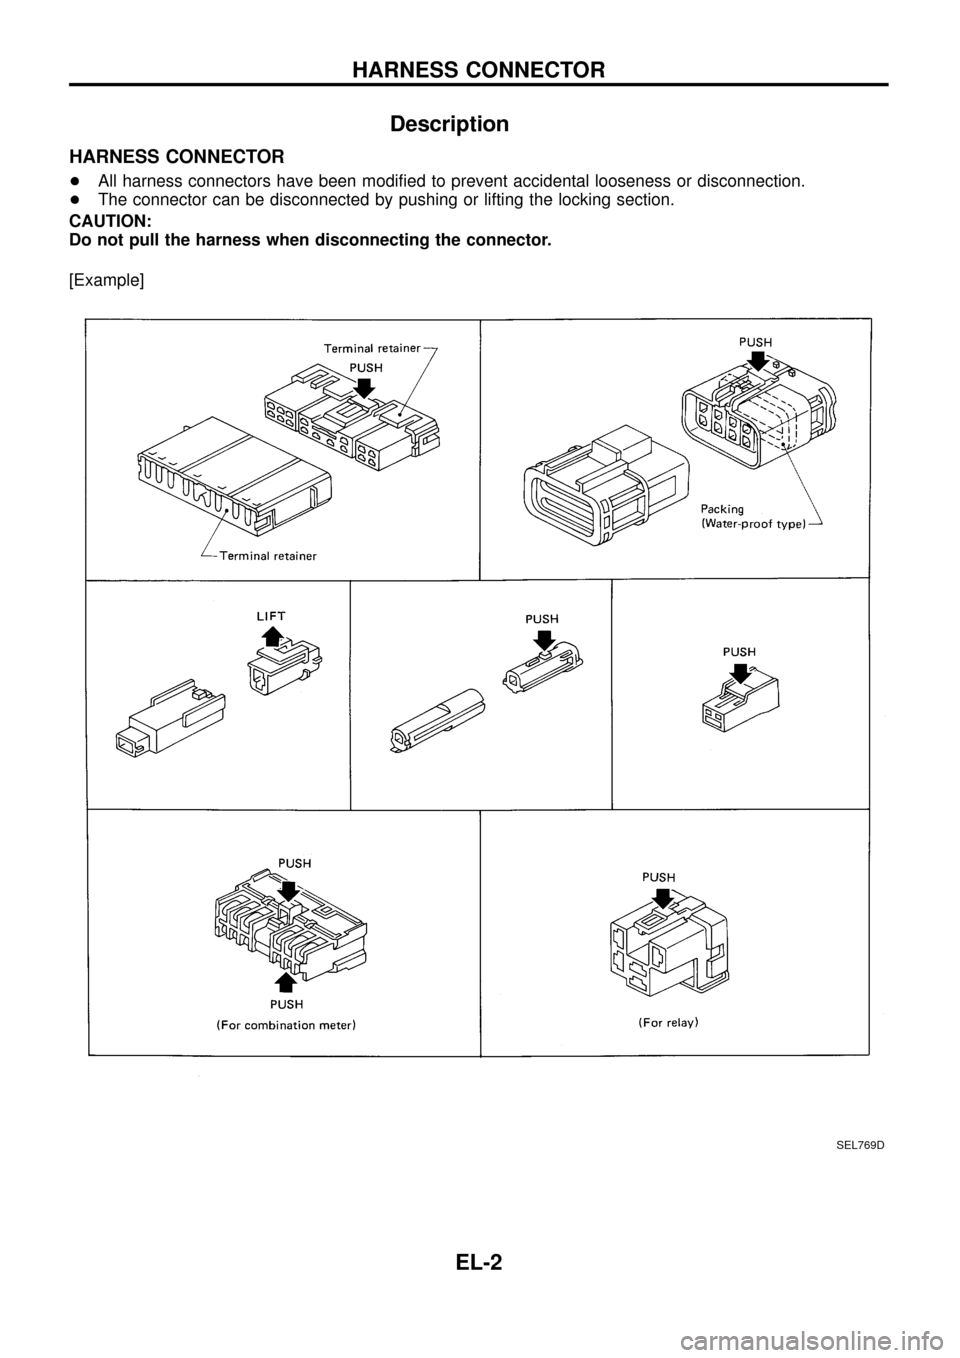 NISSAN PATROL 1998 Y61 / 5.G Electrical System Workshop Manual Description
HARNESS CONNECTOR
+All harness connectors have been modi®ed to prevent accidental looseness or disconnection.
+The connector can be disconnected by pushing or lifting the locking section.